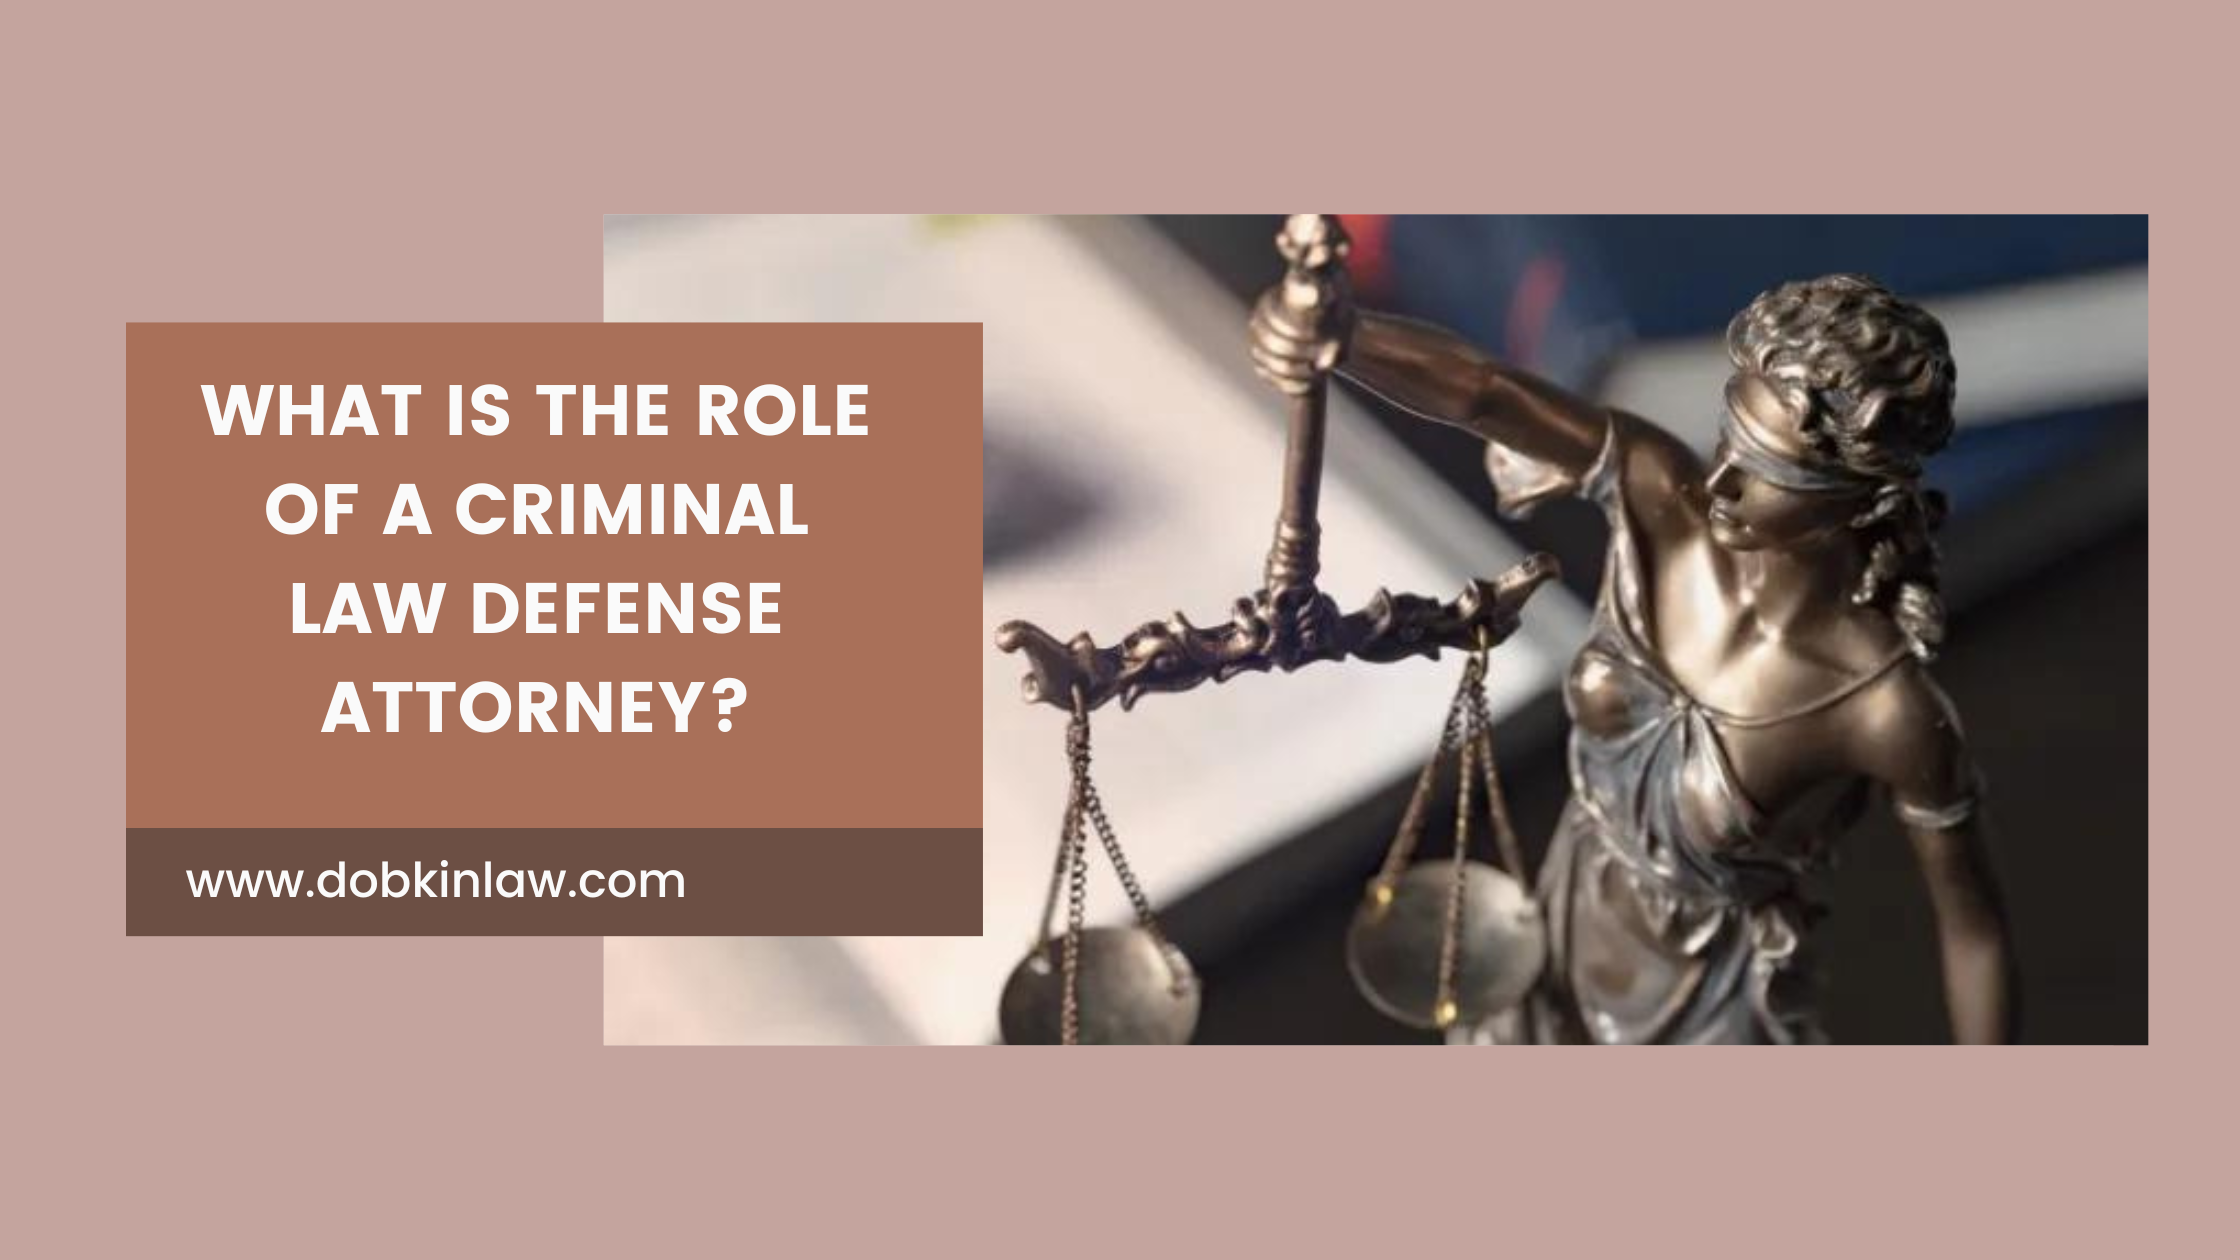 What is The Role of a Criminal Law Defense Attorney?